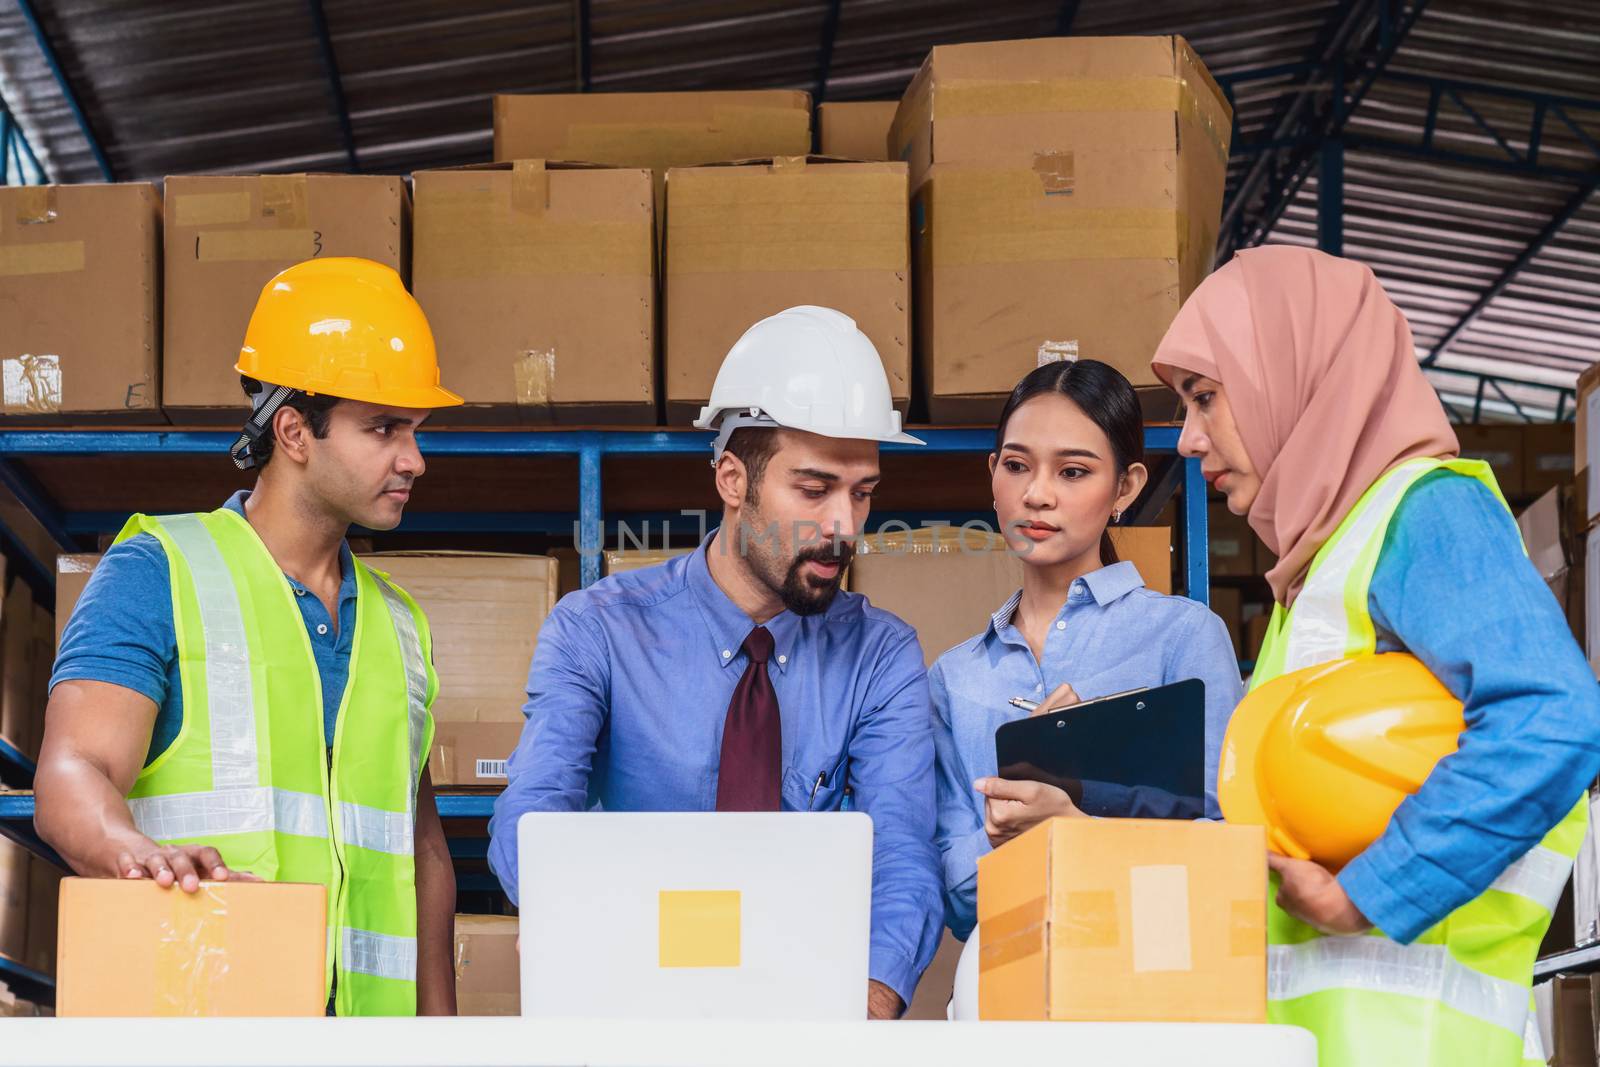 Group of Diversity warehouse worker meeting and brainstorming together in local warehouse, muslim with Hijab, indian, white caucasian and asian people wearing safety clothes in export industry concept